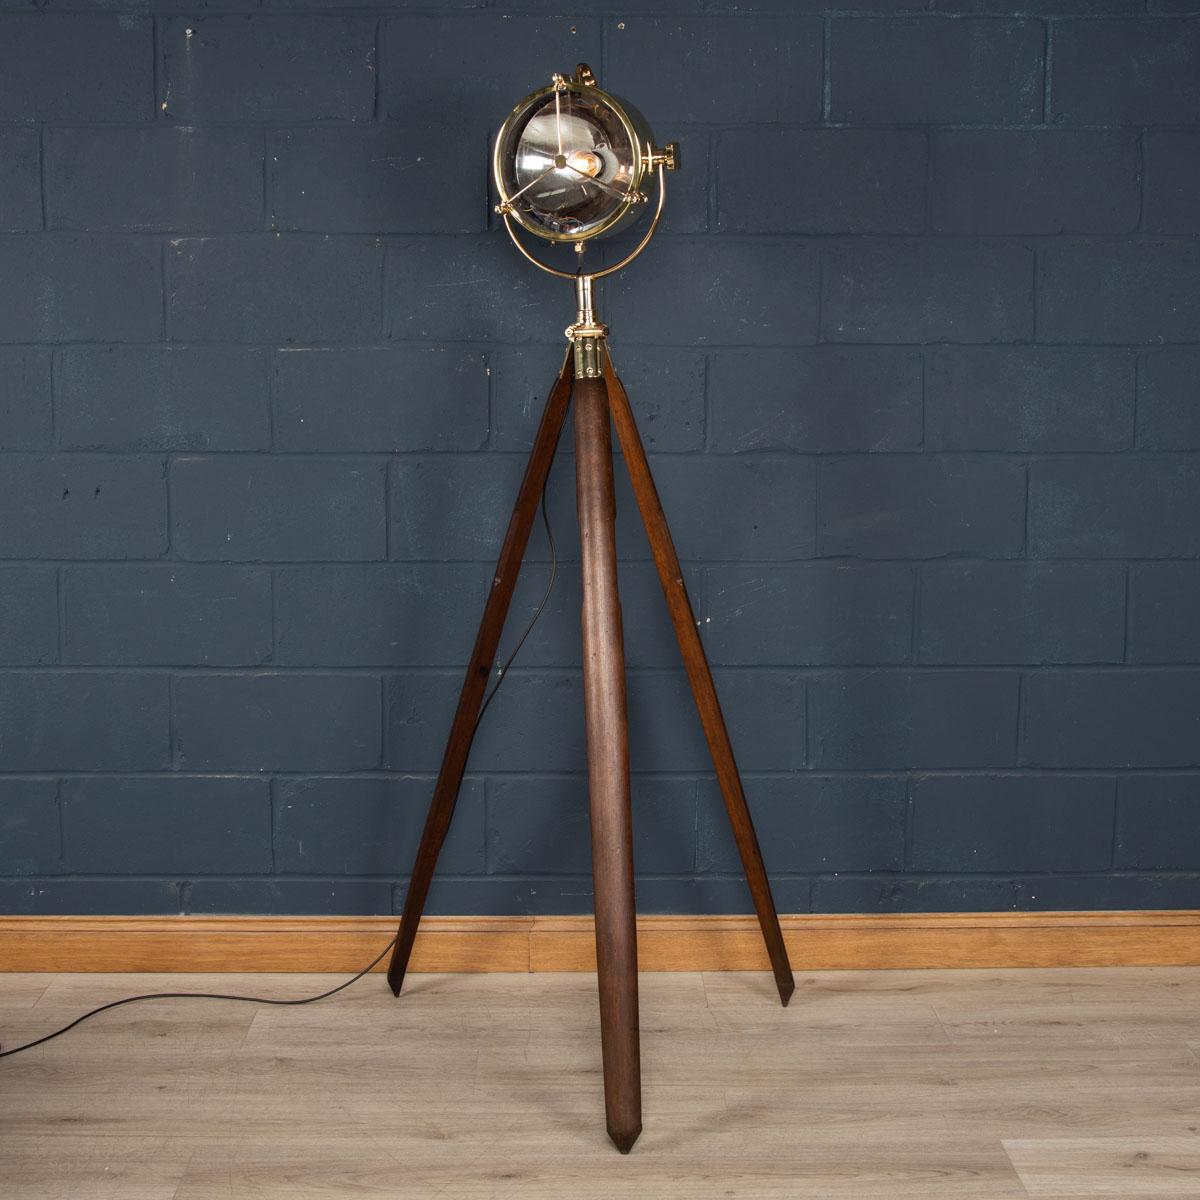 A fantastic mid 20th century English naval searchlight, mounted on an earlier 20th century tripod. These lamps would have been mounted on military or shipping vessels.

Condition
In Good Condition - some minor dents throughout (please refer to